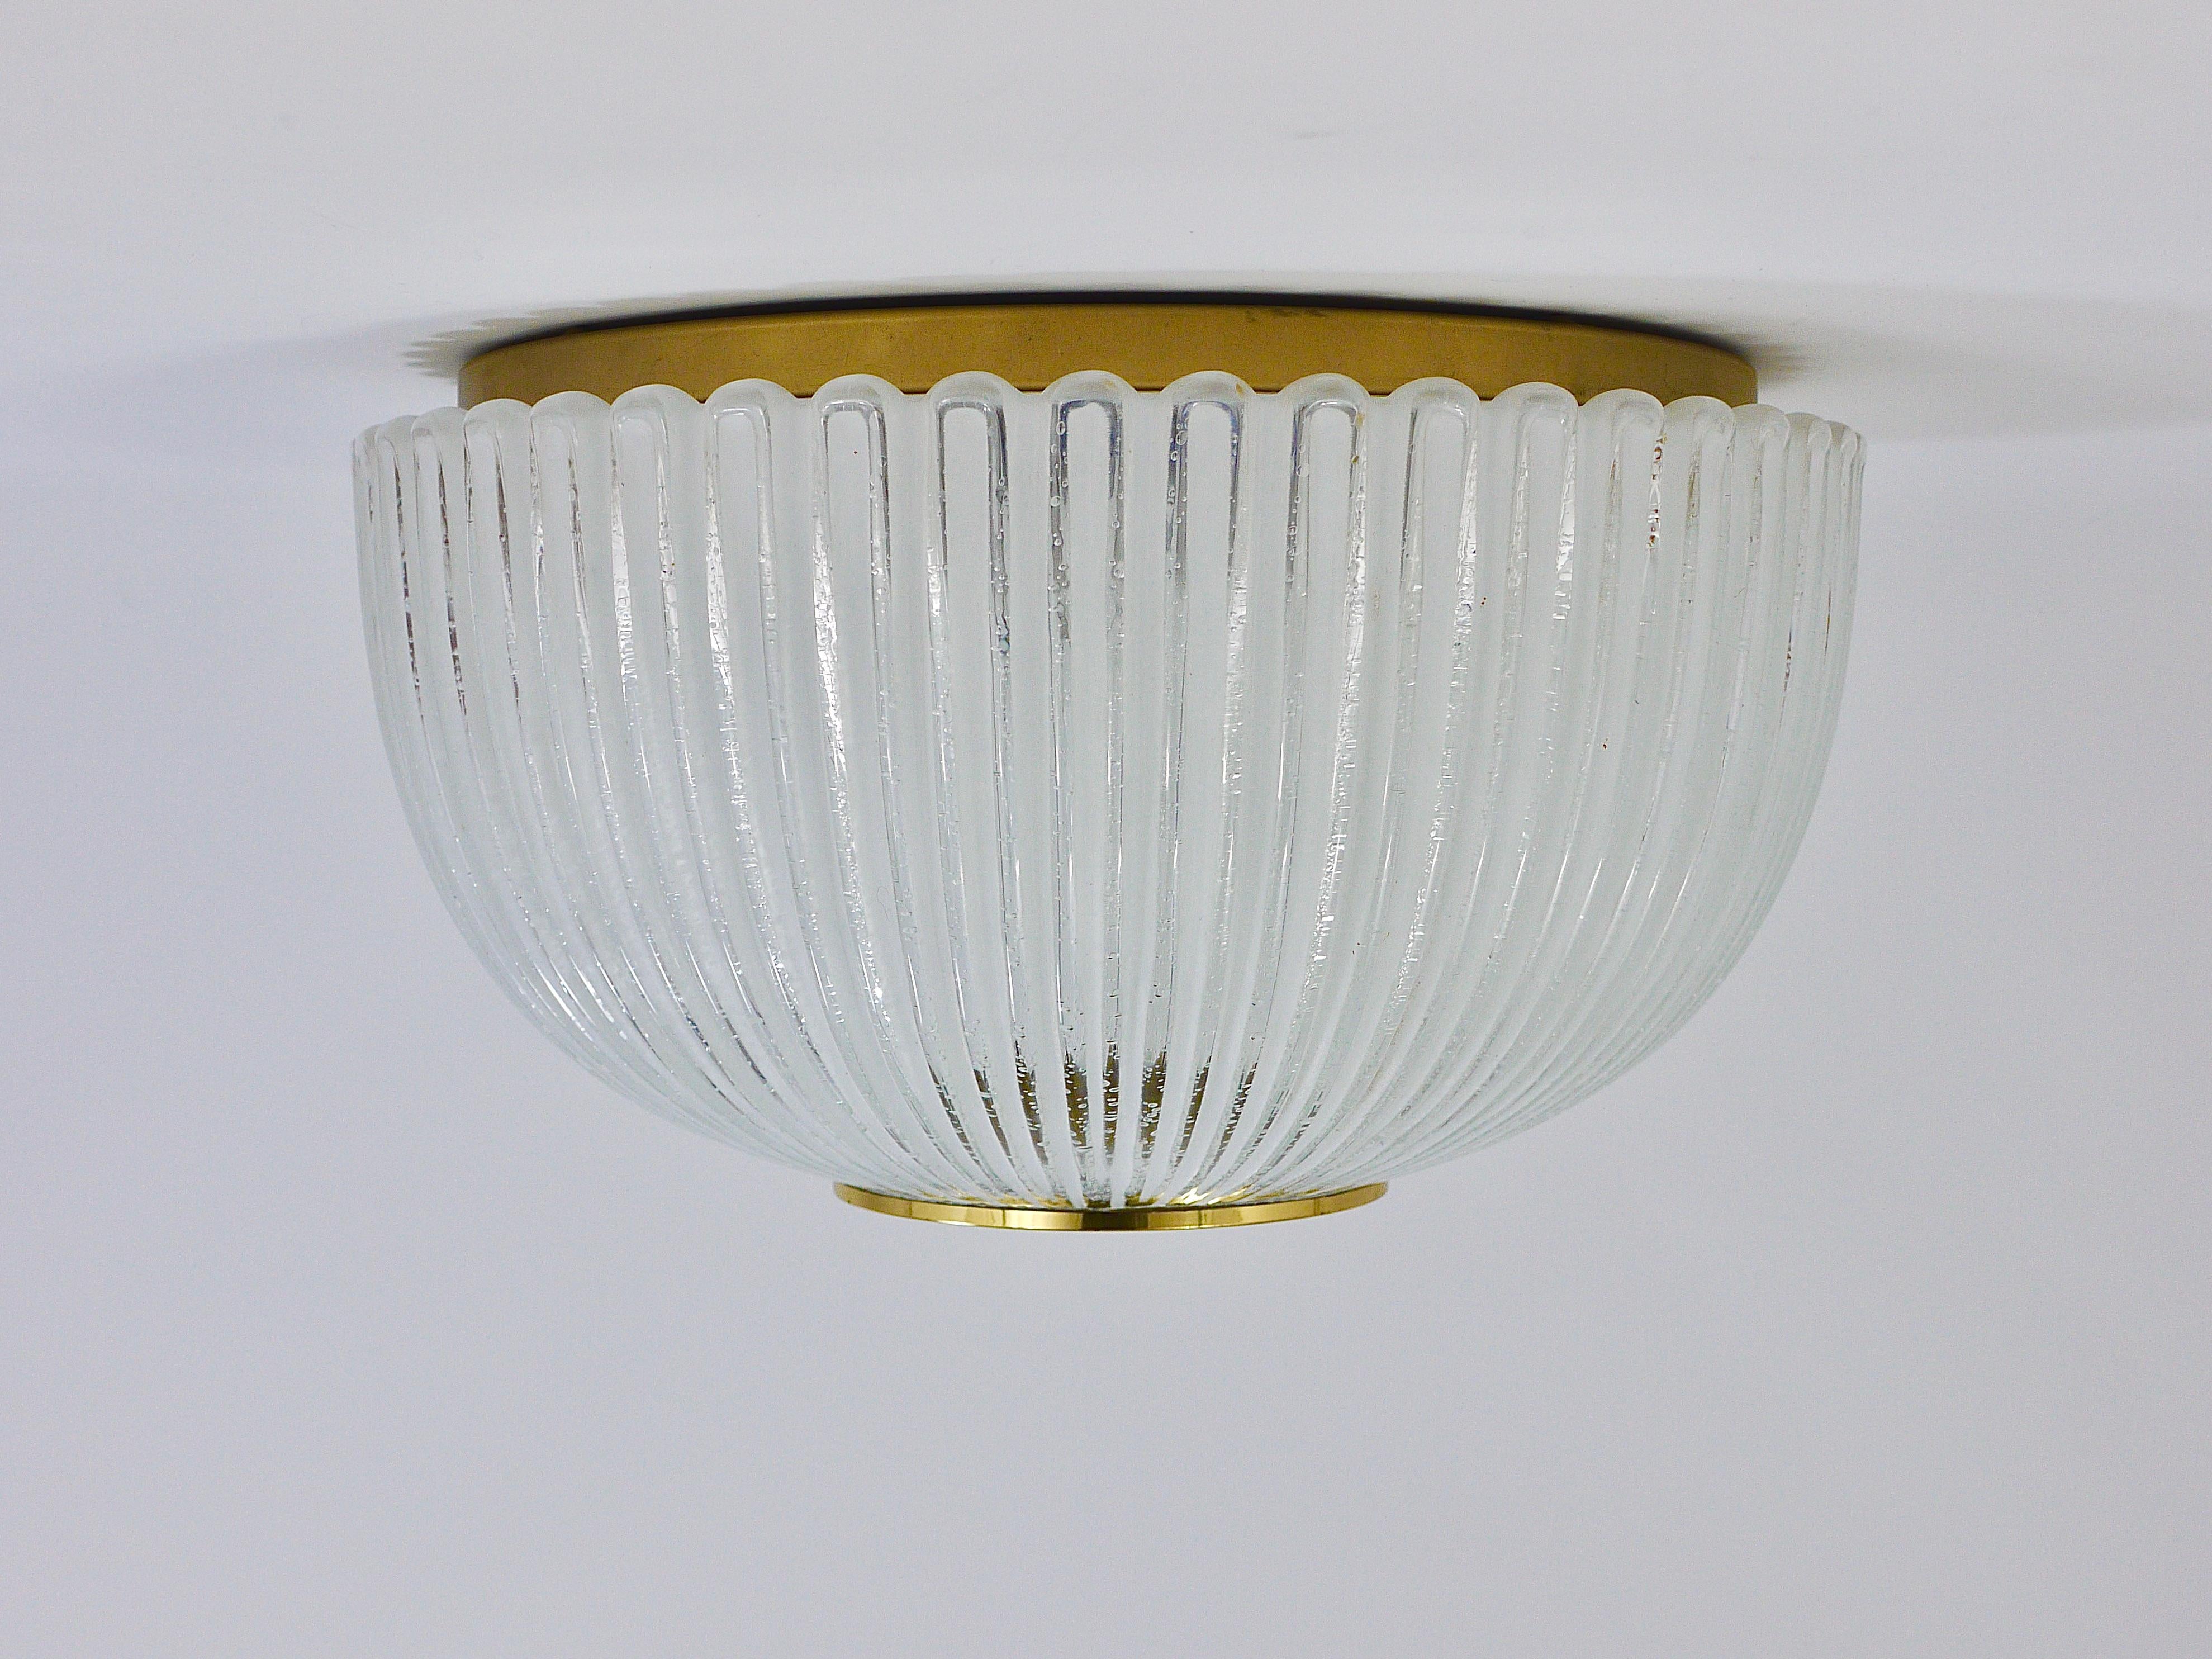 A beautiful and large hemispherical Midcentury ceiling light or flushmount from the 1970s, manufactured by Limburg Germany. This light has a diameter of 16 inches, its round striped lampshade is handmade of white and clear melting glass with tiny